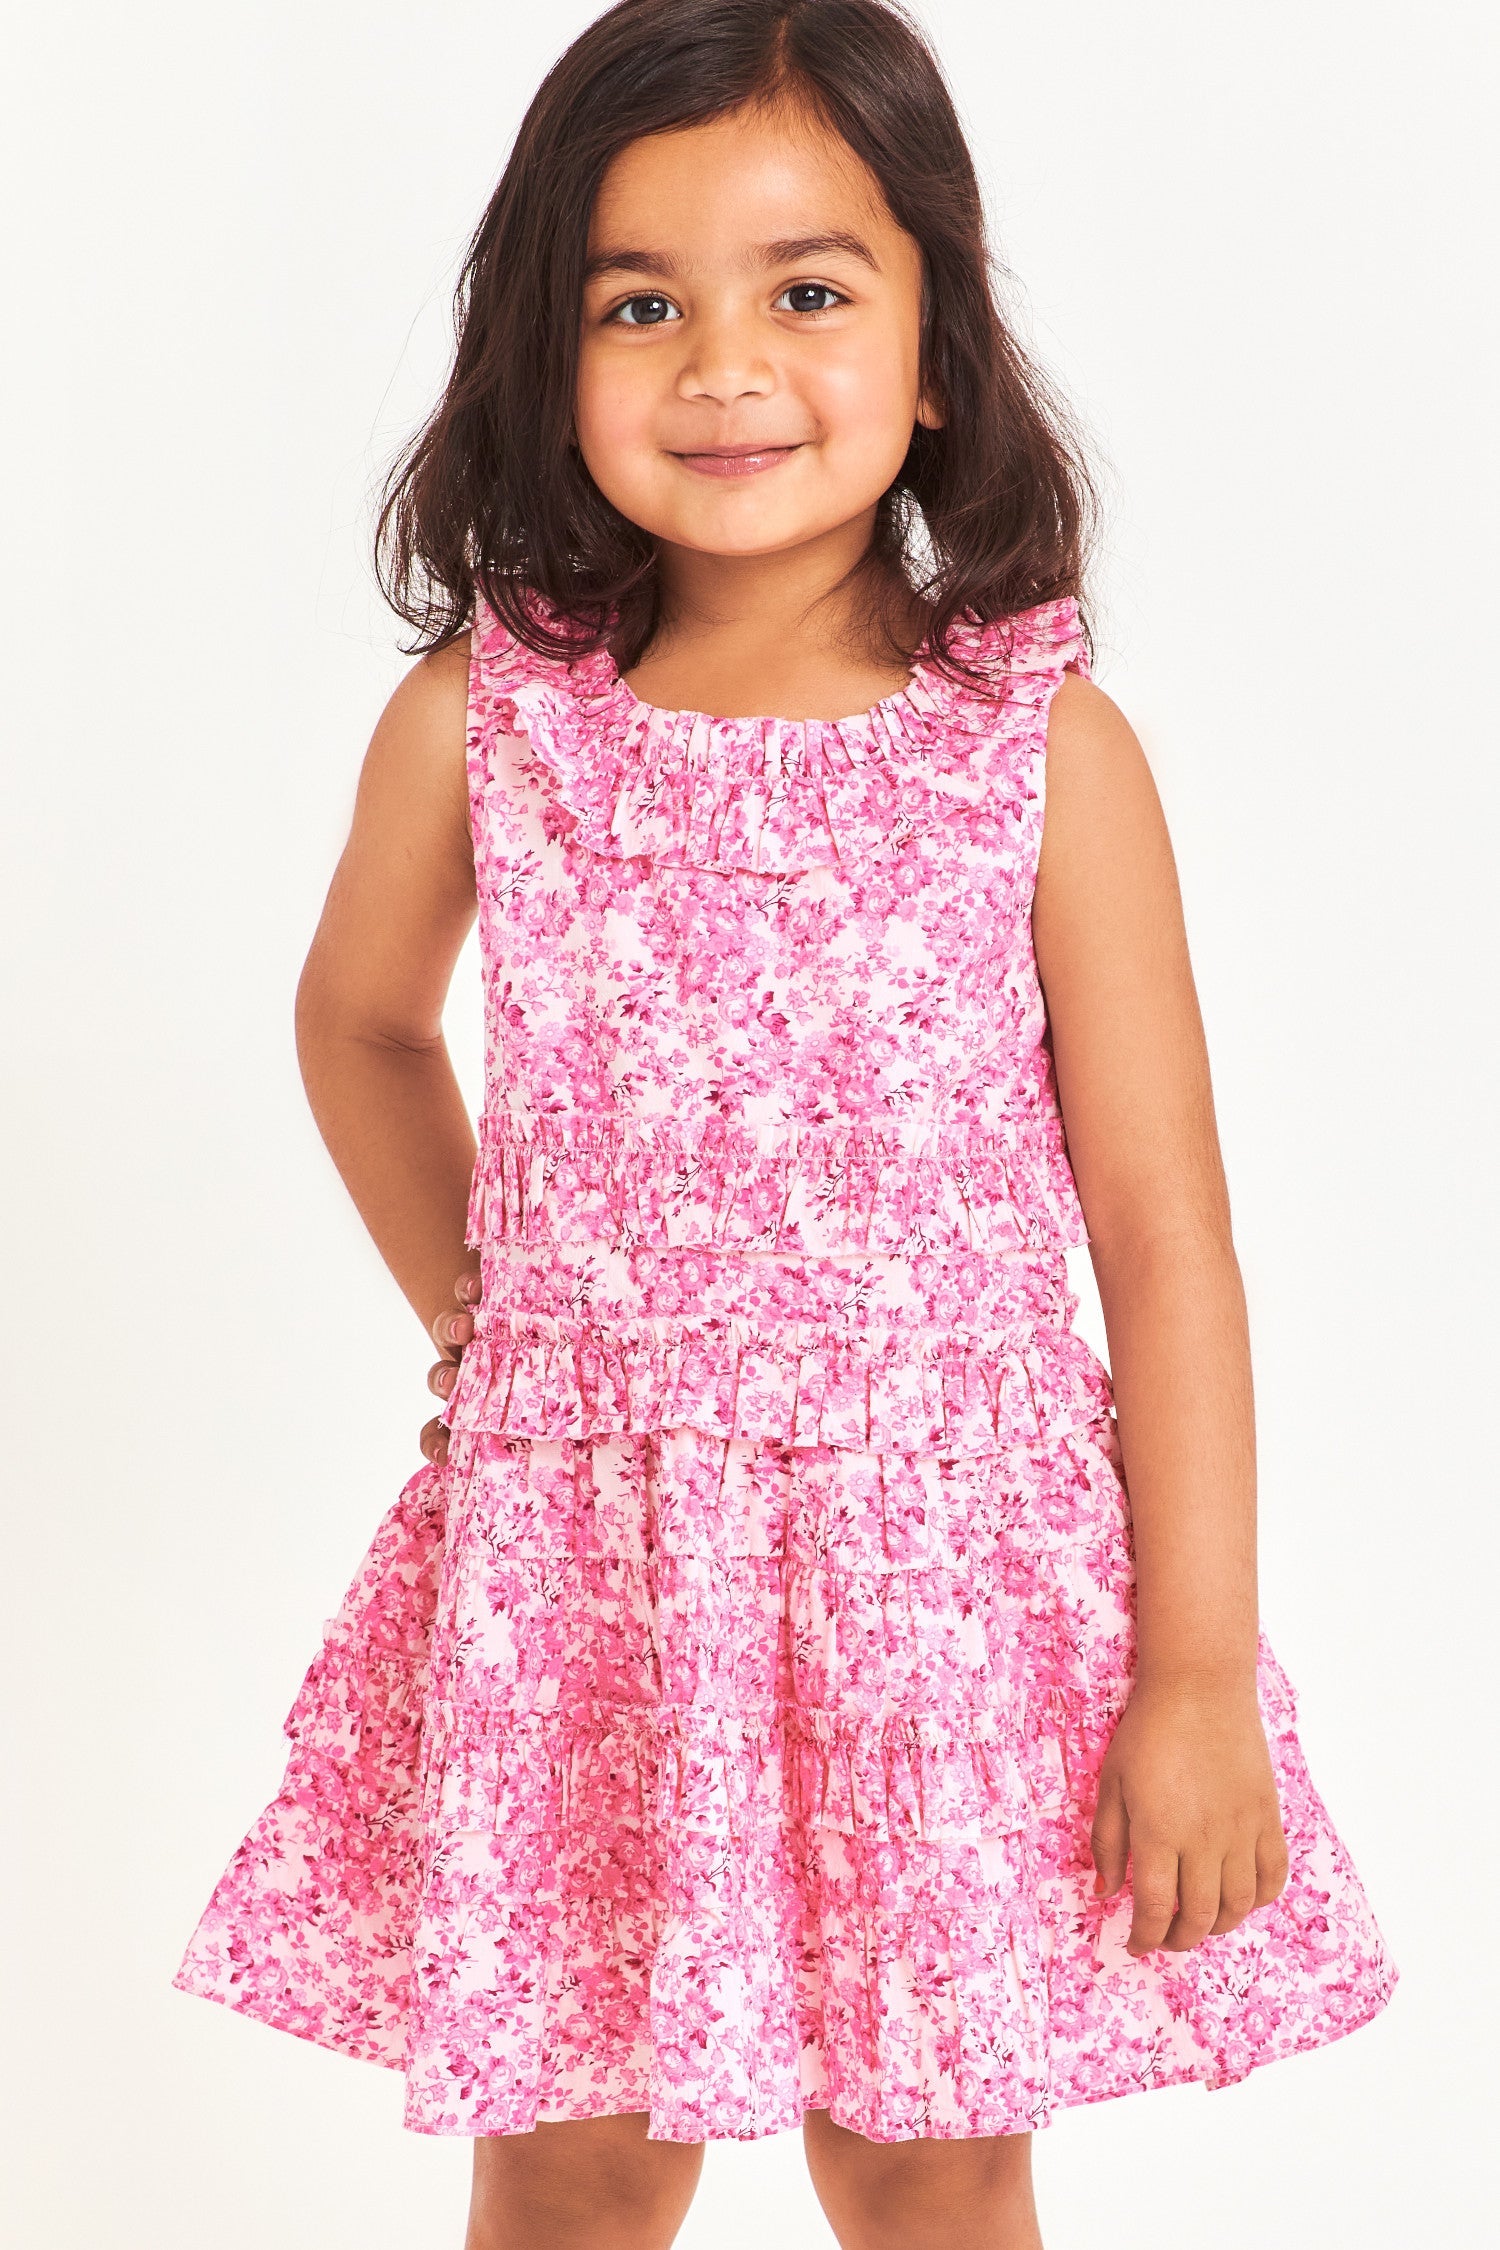 Pink floral kids top with ruffle details